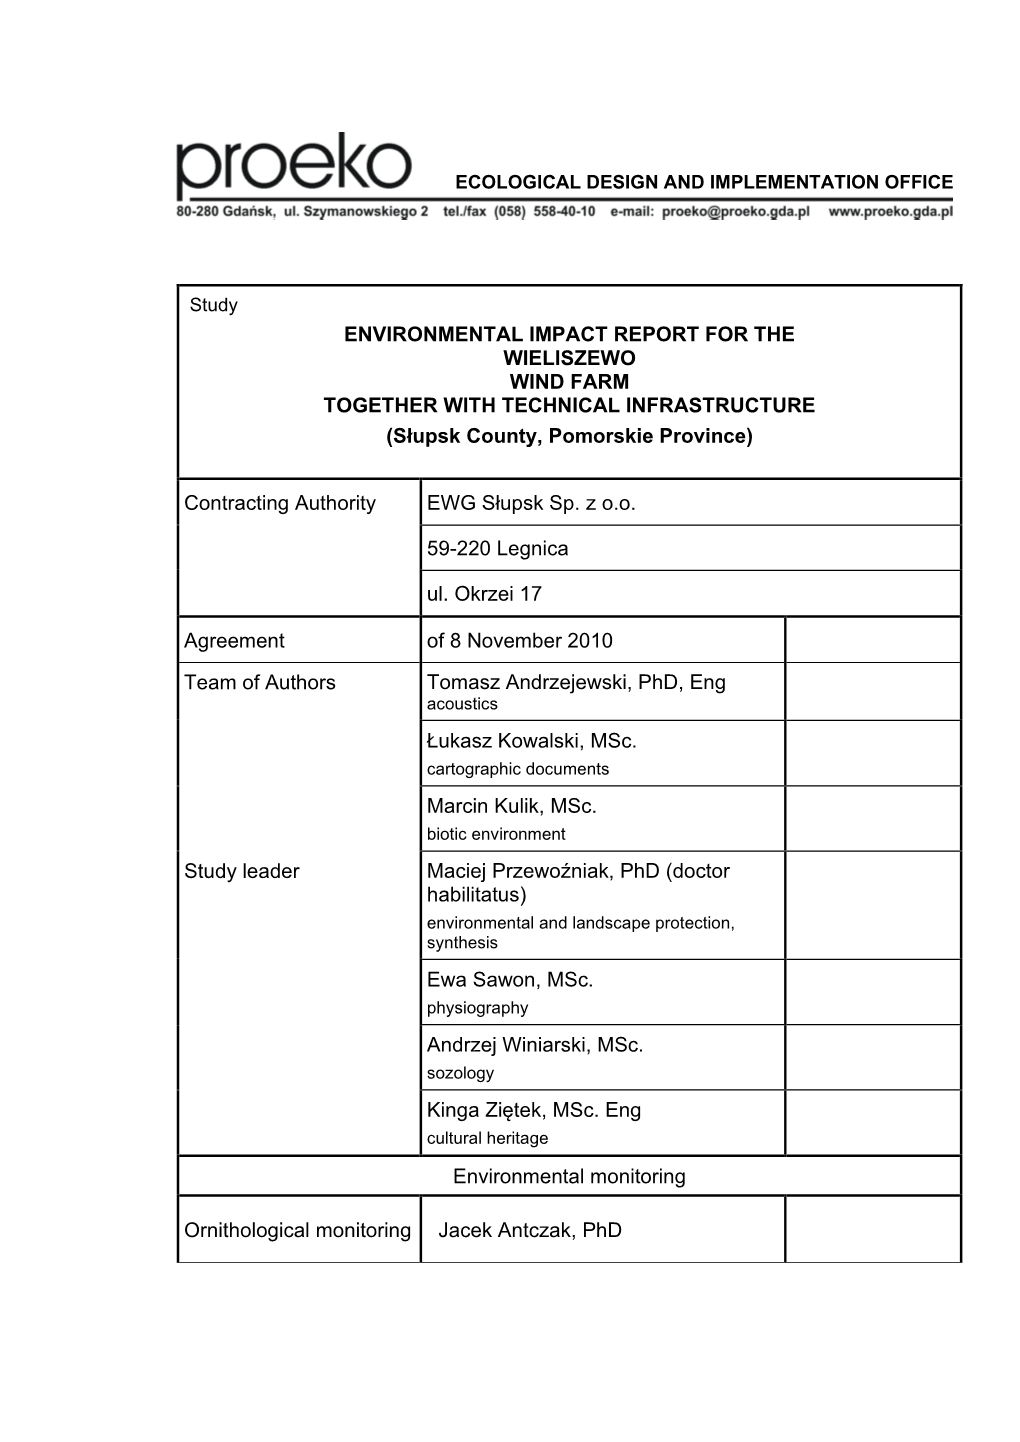 ENVIRONMENTAL IMPACT REPORT for the WIELISZEWO WIND FARM TOGETHER with TECHNICAL INFRASTRUCTURE (Słupsk County, Pomorskie Province)